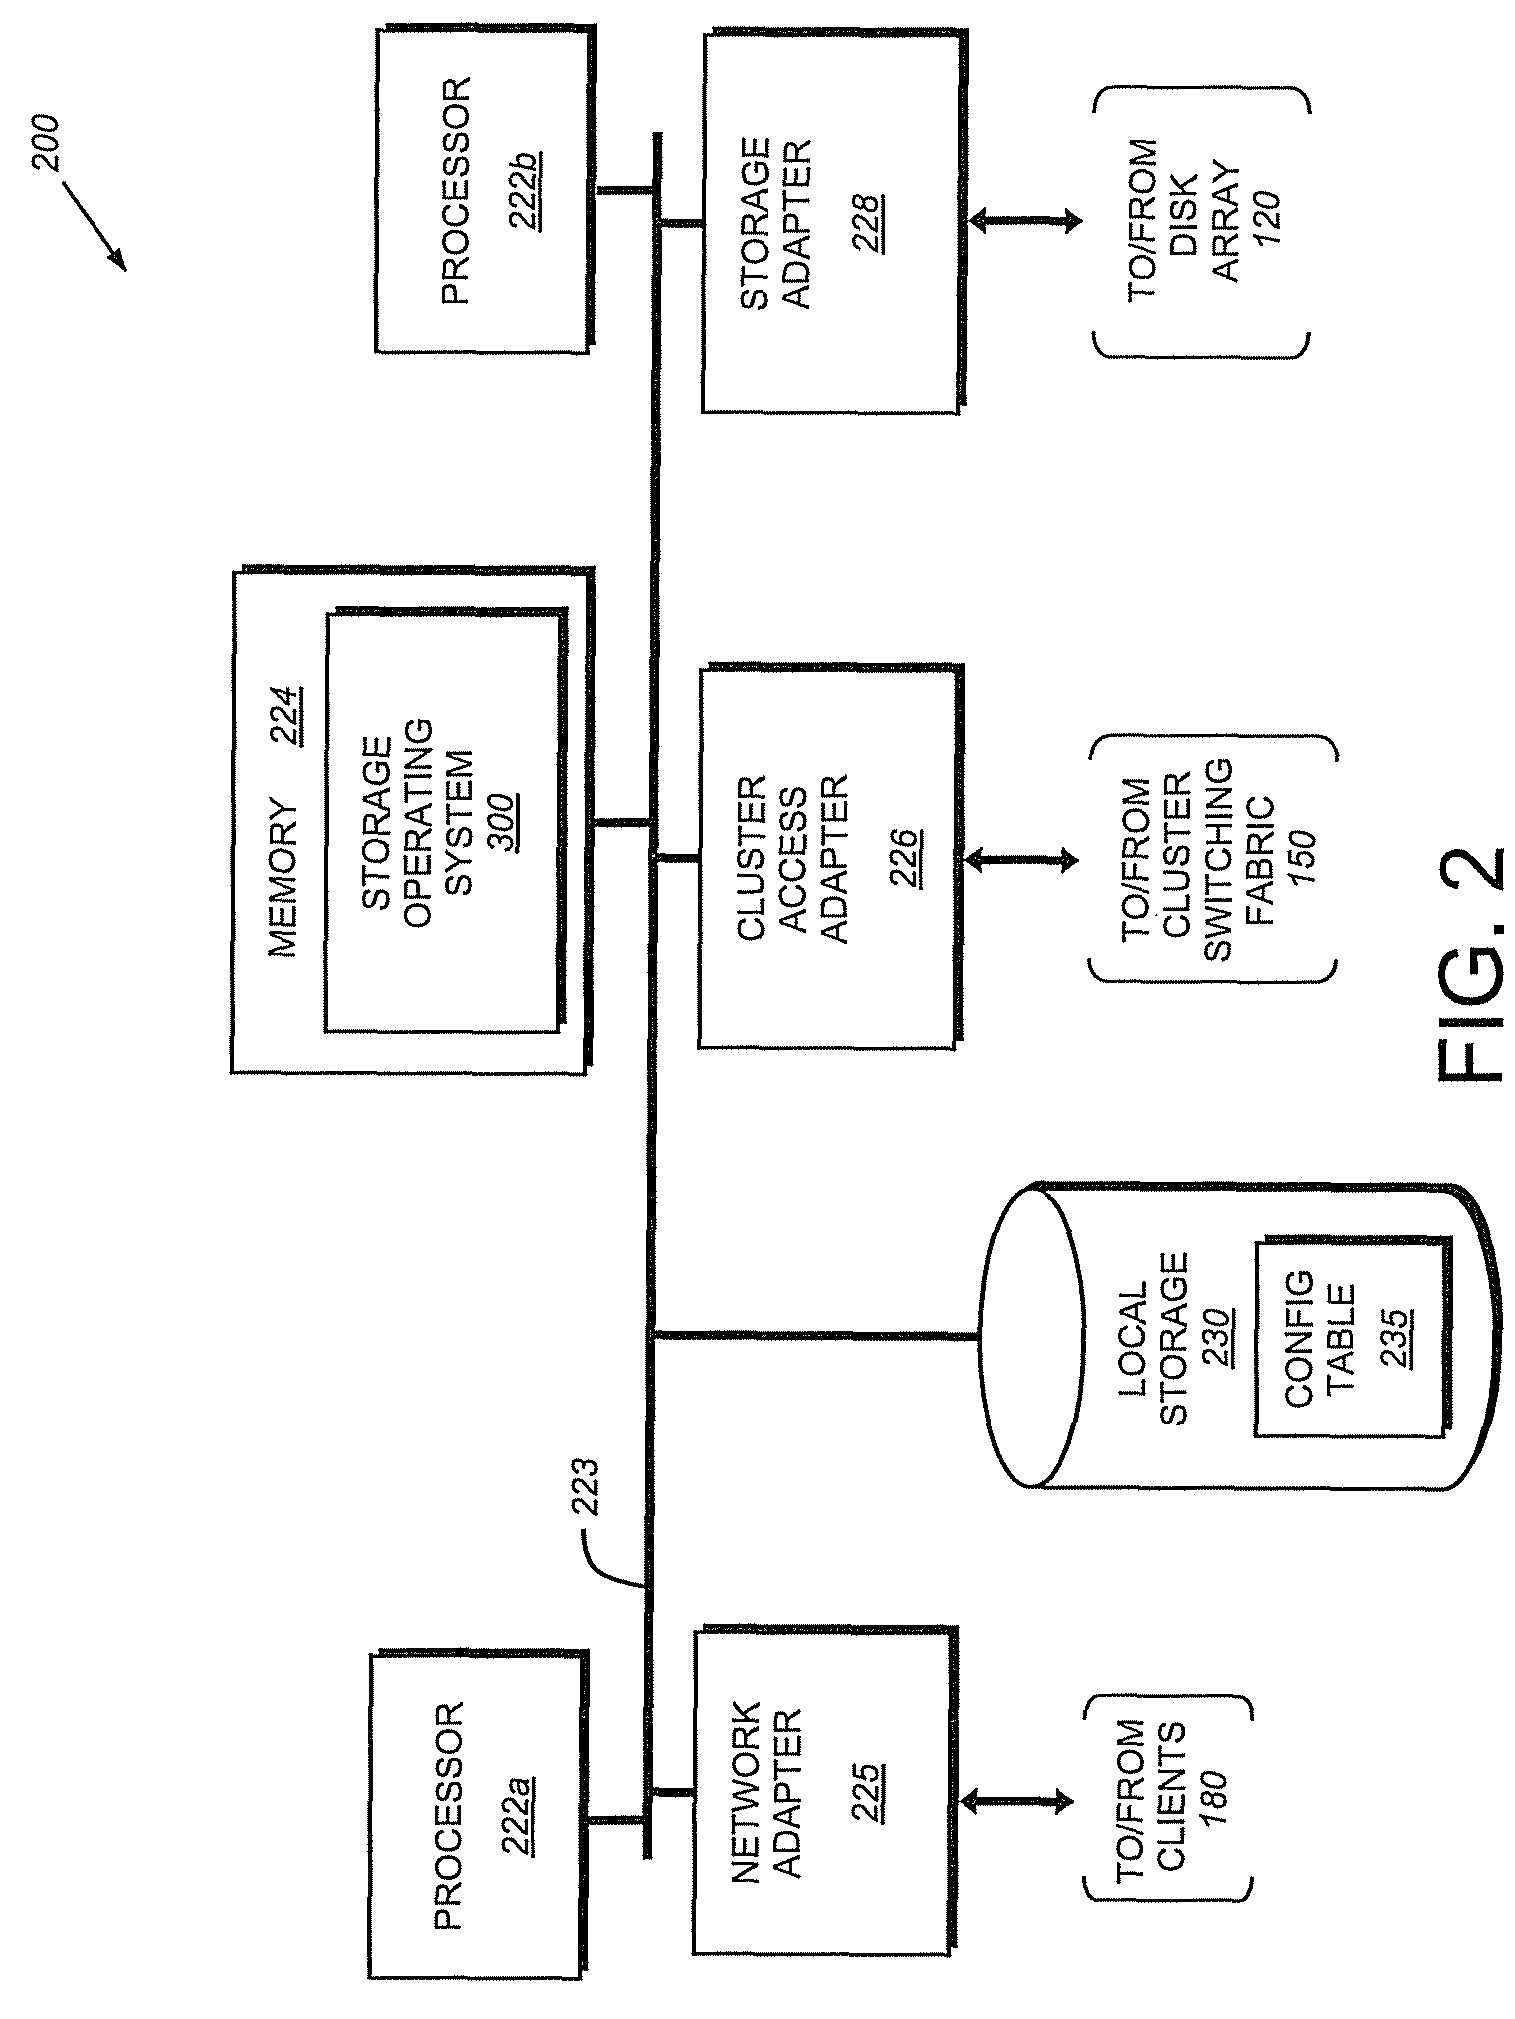 Data distribution through capacity leveling in a striped file system